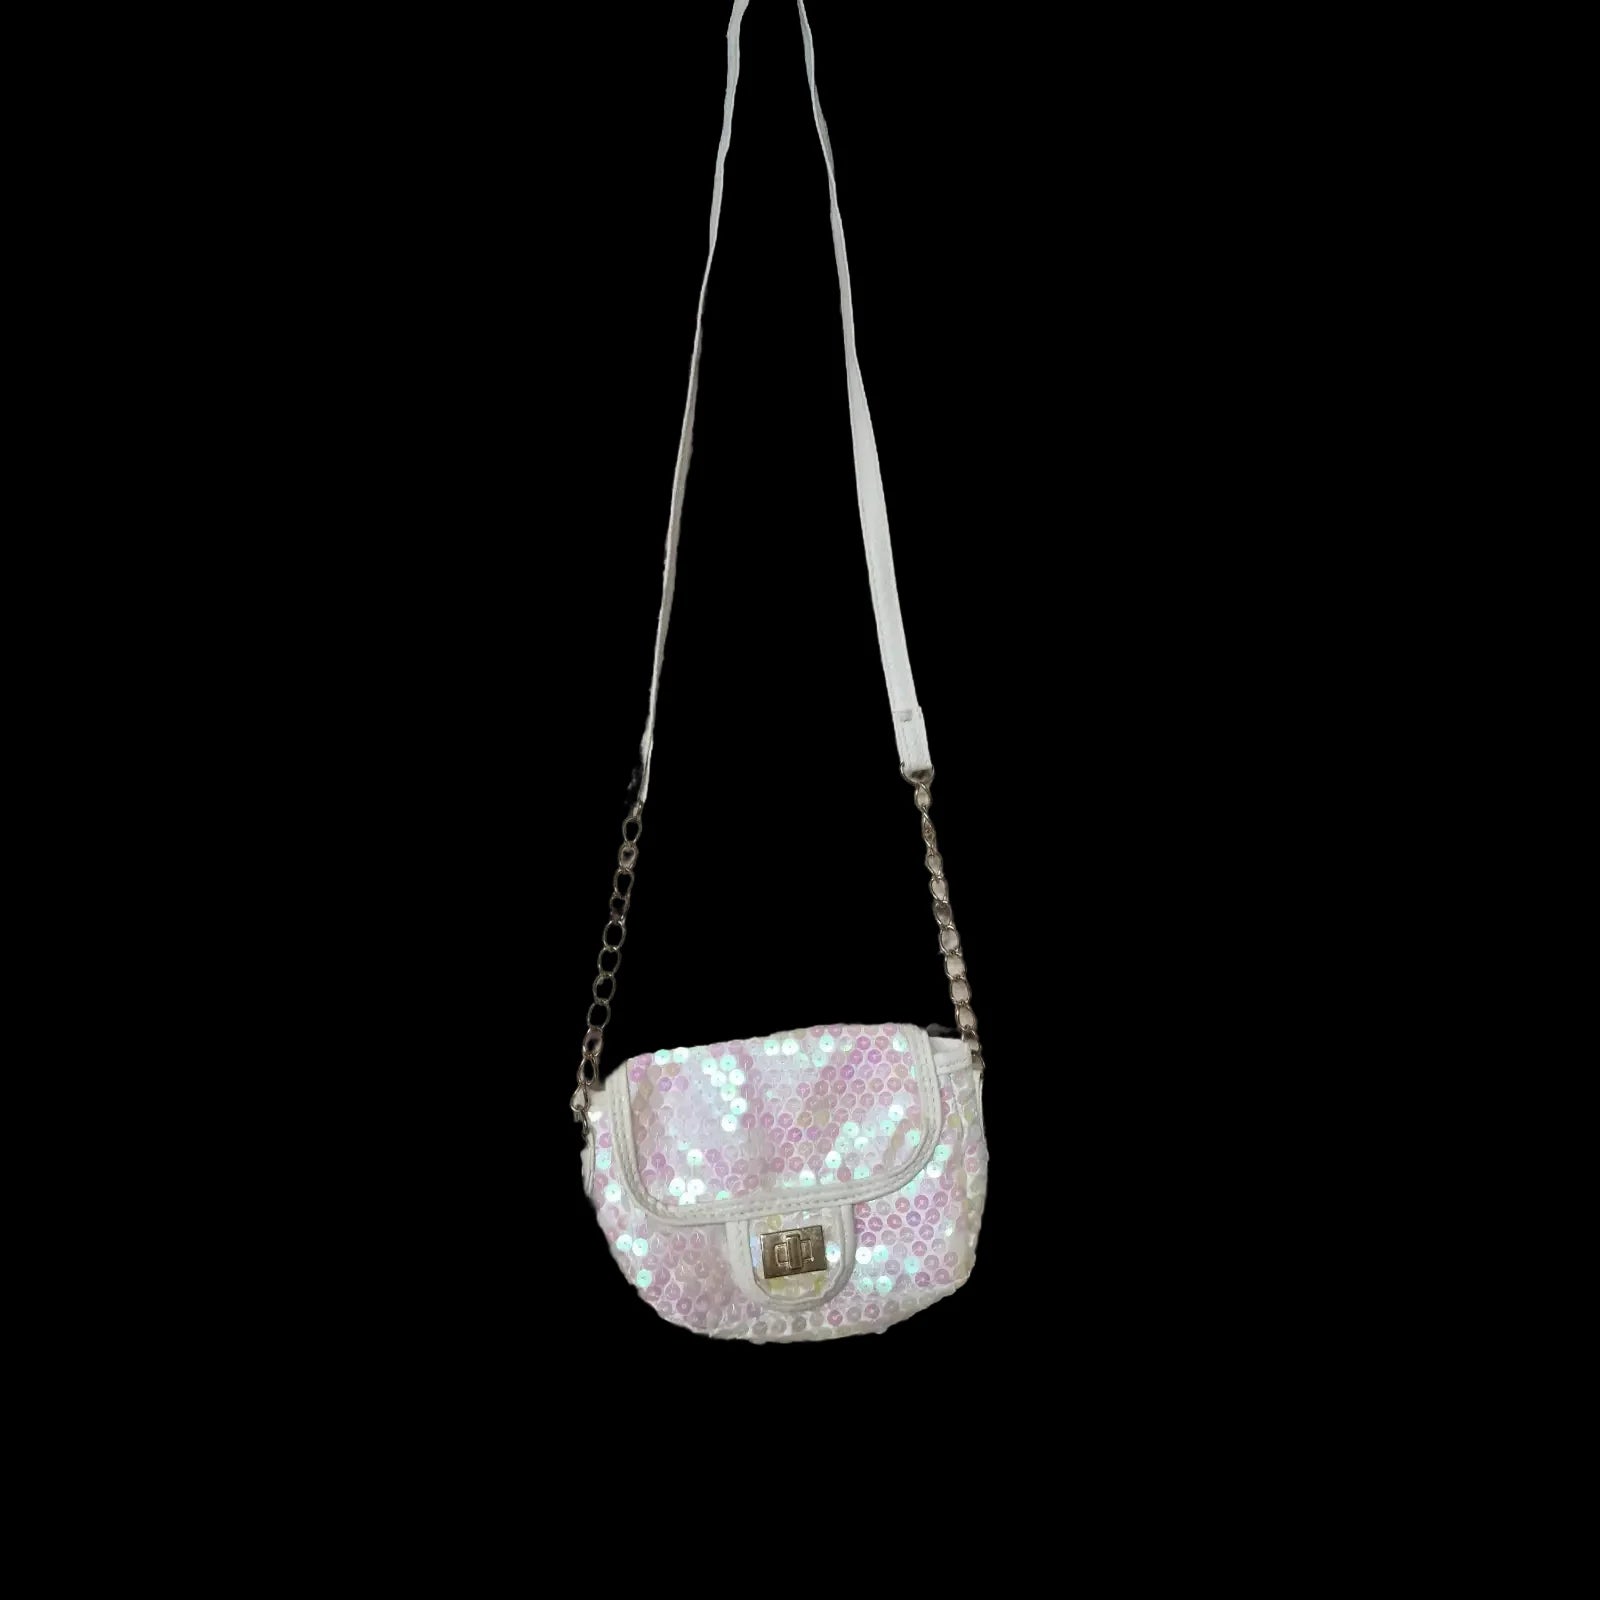 Young Dimensions Sequin Bag - Bags - Dimension - 2 - 1243